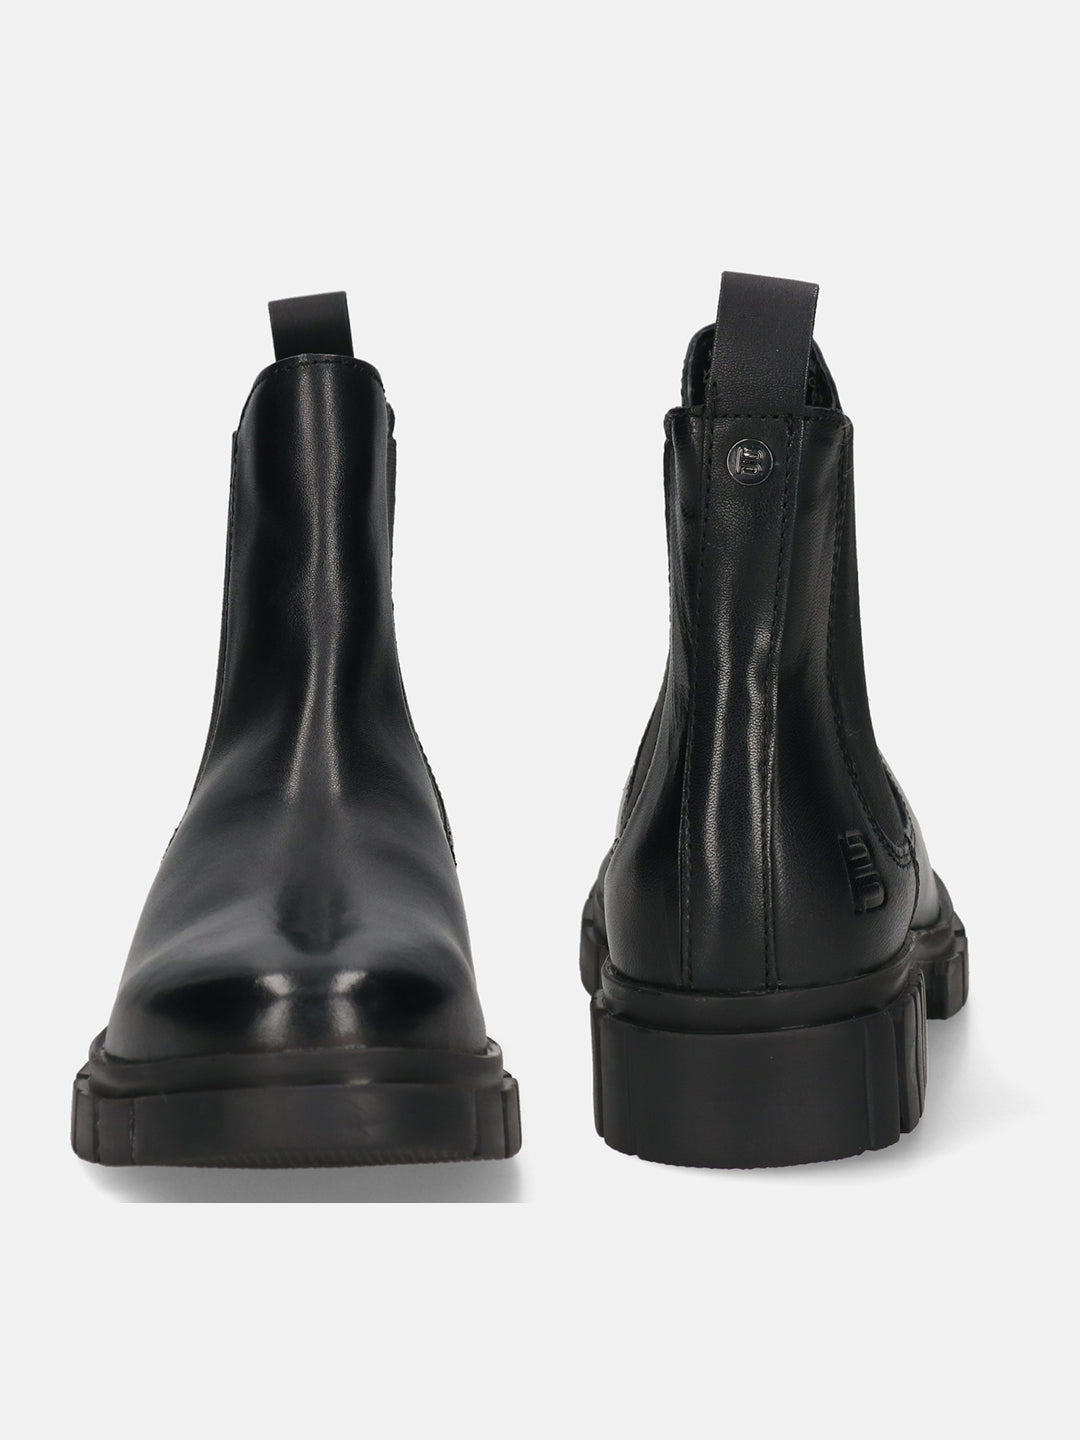 Fiona Black Leather Chelsea Boots